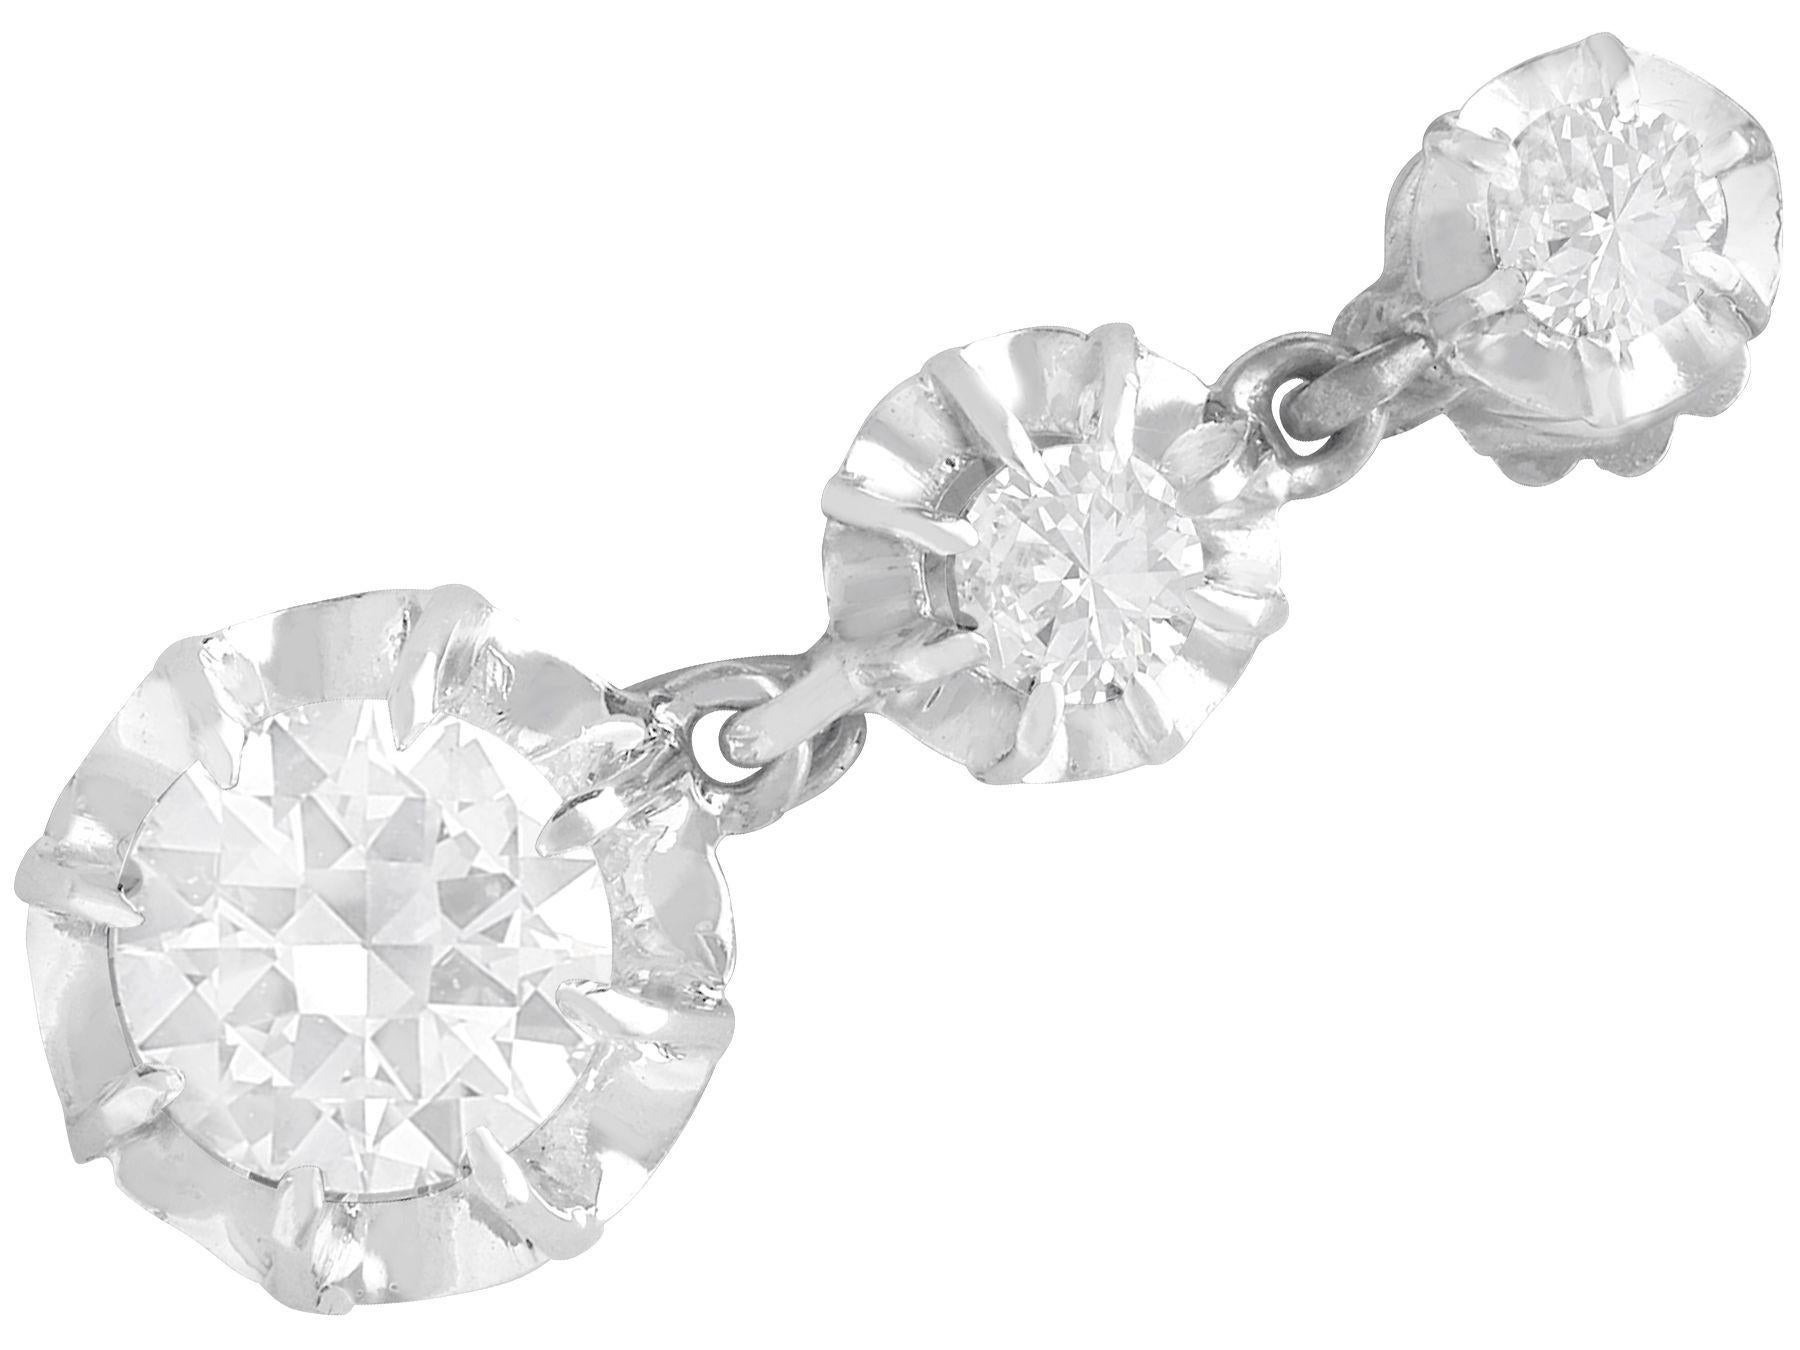 A stunning, fine and impressive pair of antique 1.81 carat diamond and platinum earrings; part of our diverse diamond jewelry and estate jewelry

These stunning antique earrings have been crafted in platinum with 18k white gold fittings.

These